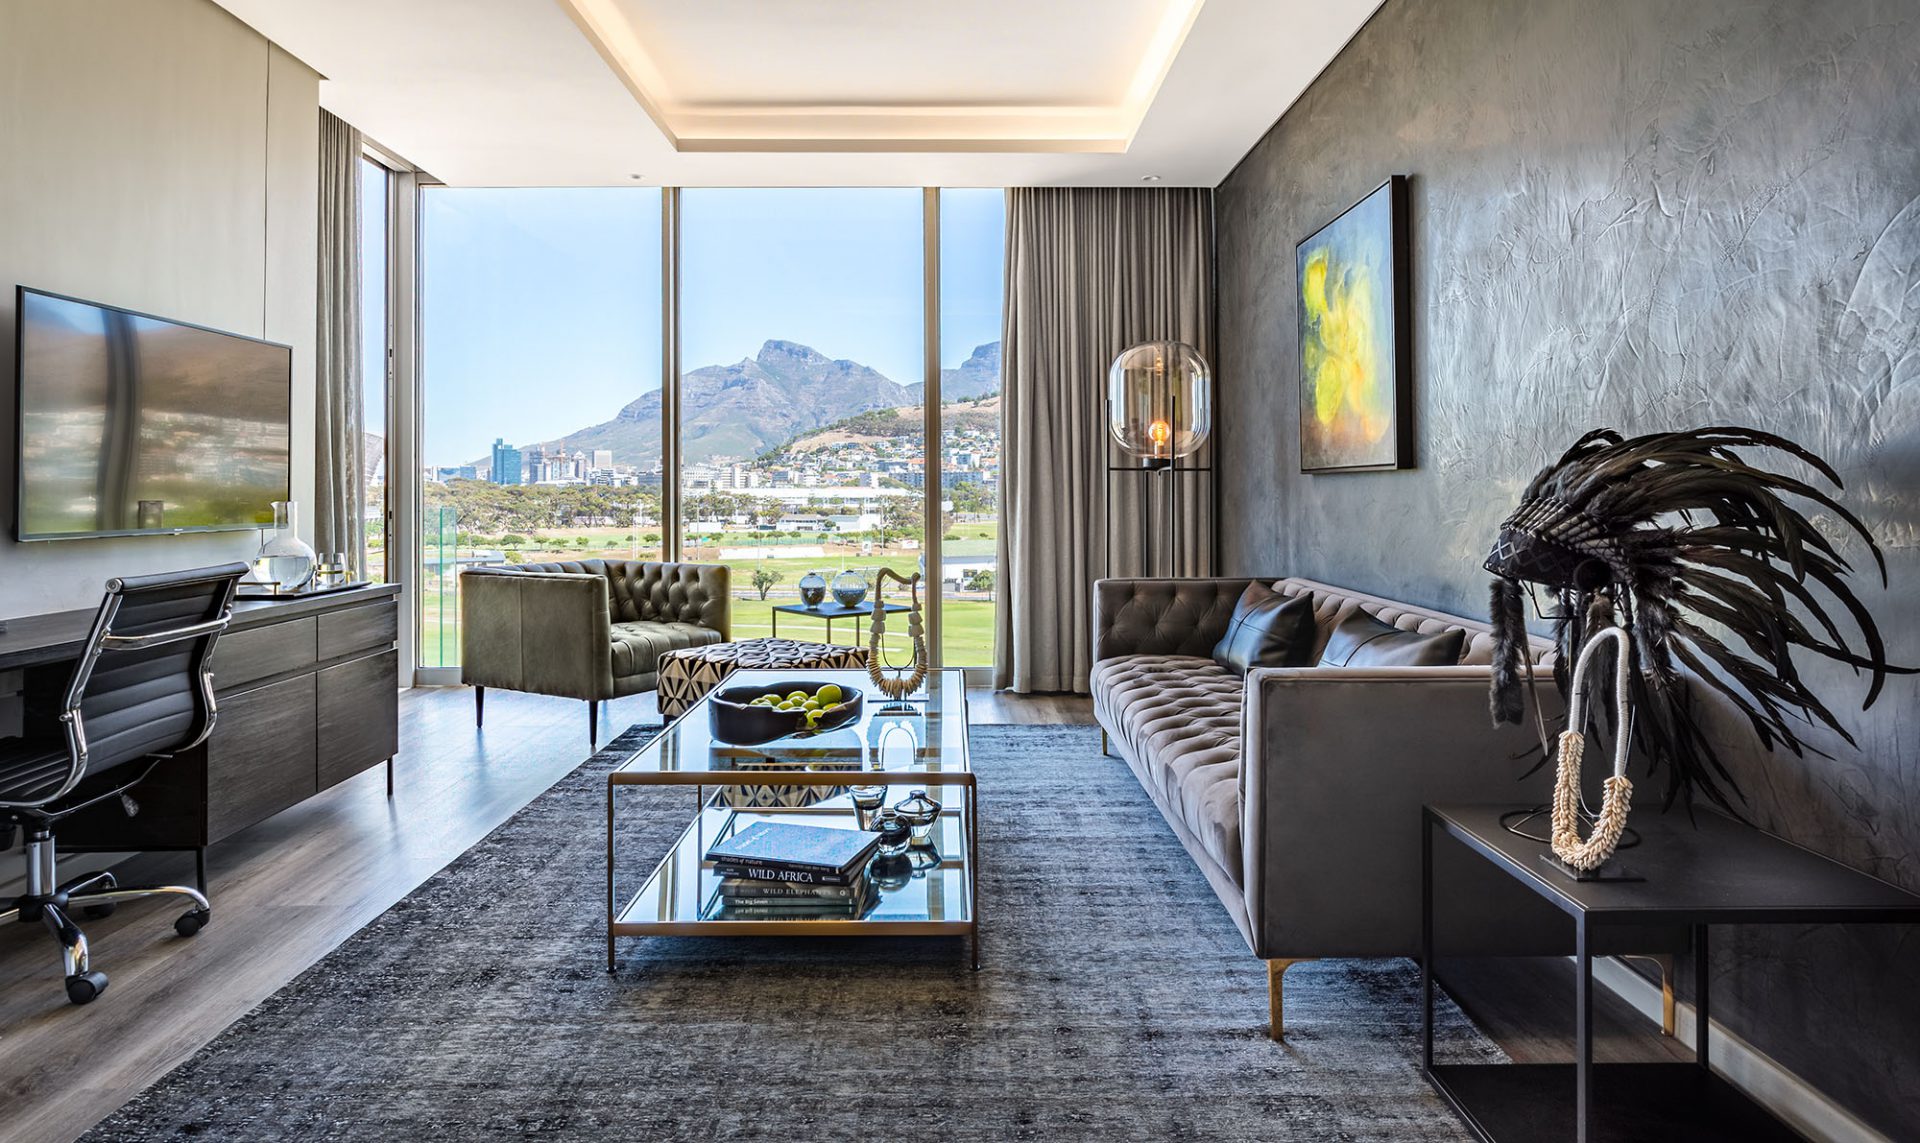 A luxurious living room setting with dark finishes and floor to ceiling windows that look out onto a golf course. The room has a couch, coffee table, lamp, television, workstation and a canvas on the wall.